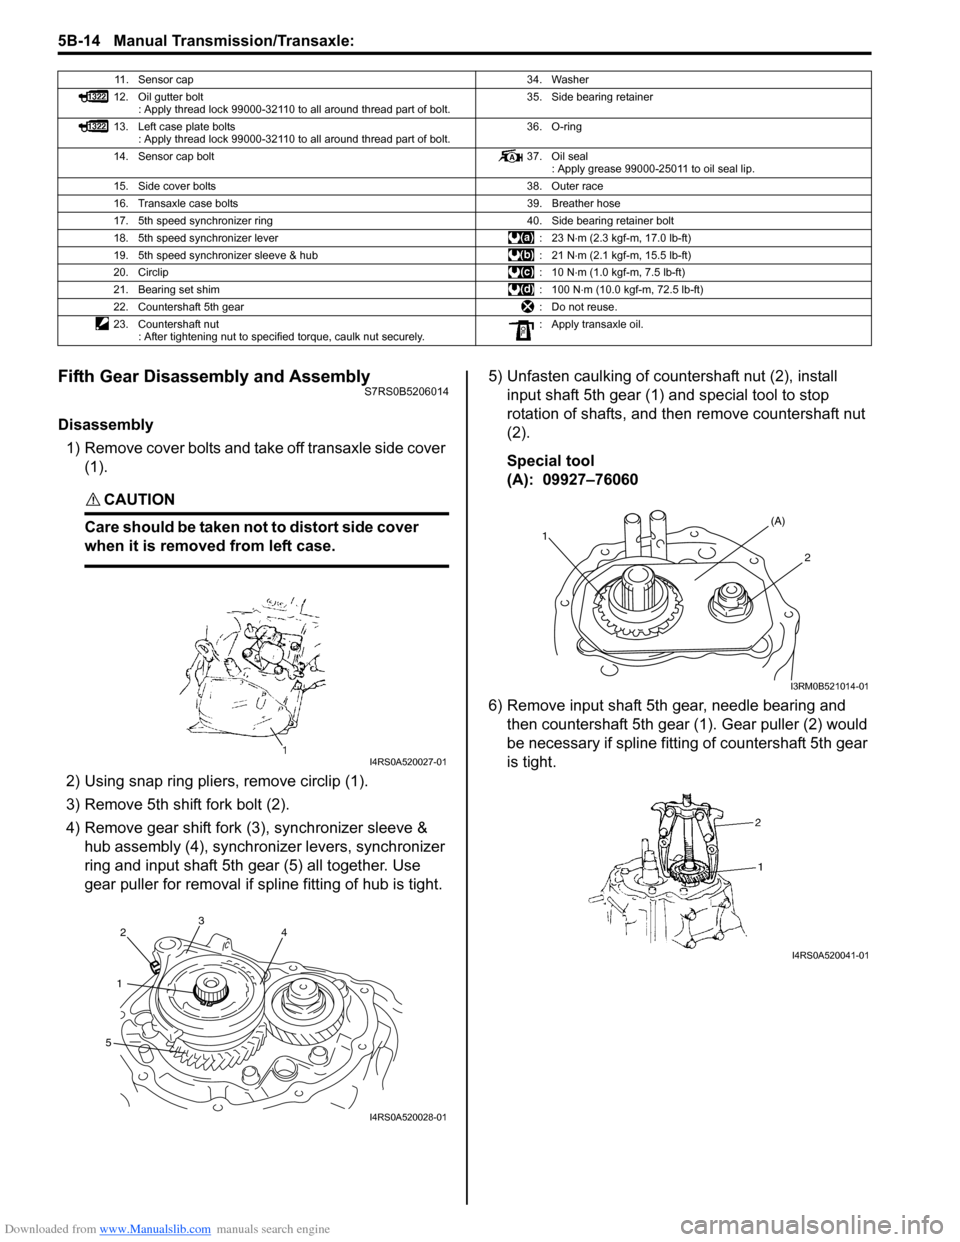 SUZUKI SWIFT 2005 2.G Service Workshop Manual Downloaded from www.Manualslib.com manuals search engine 5B-14 Manual Transmission/Transaxle: 
Fifth Gear Disassembly and AssemblyS7RS0B5206014
Disassembly1) Remove cover bolts and take off transaxle 